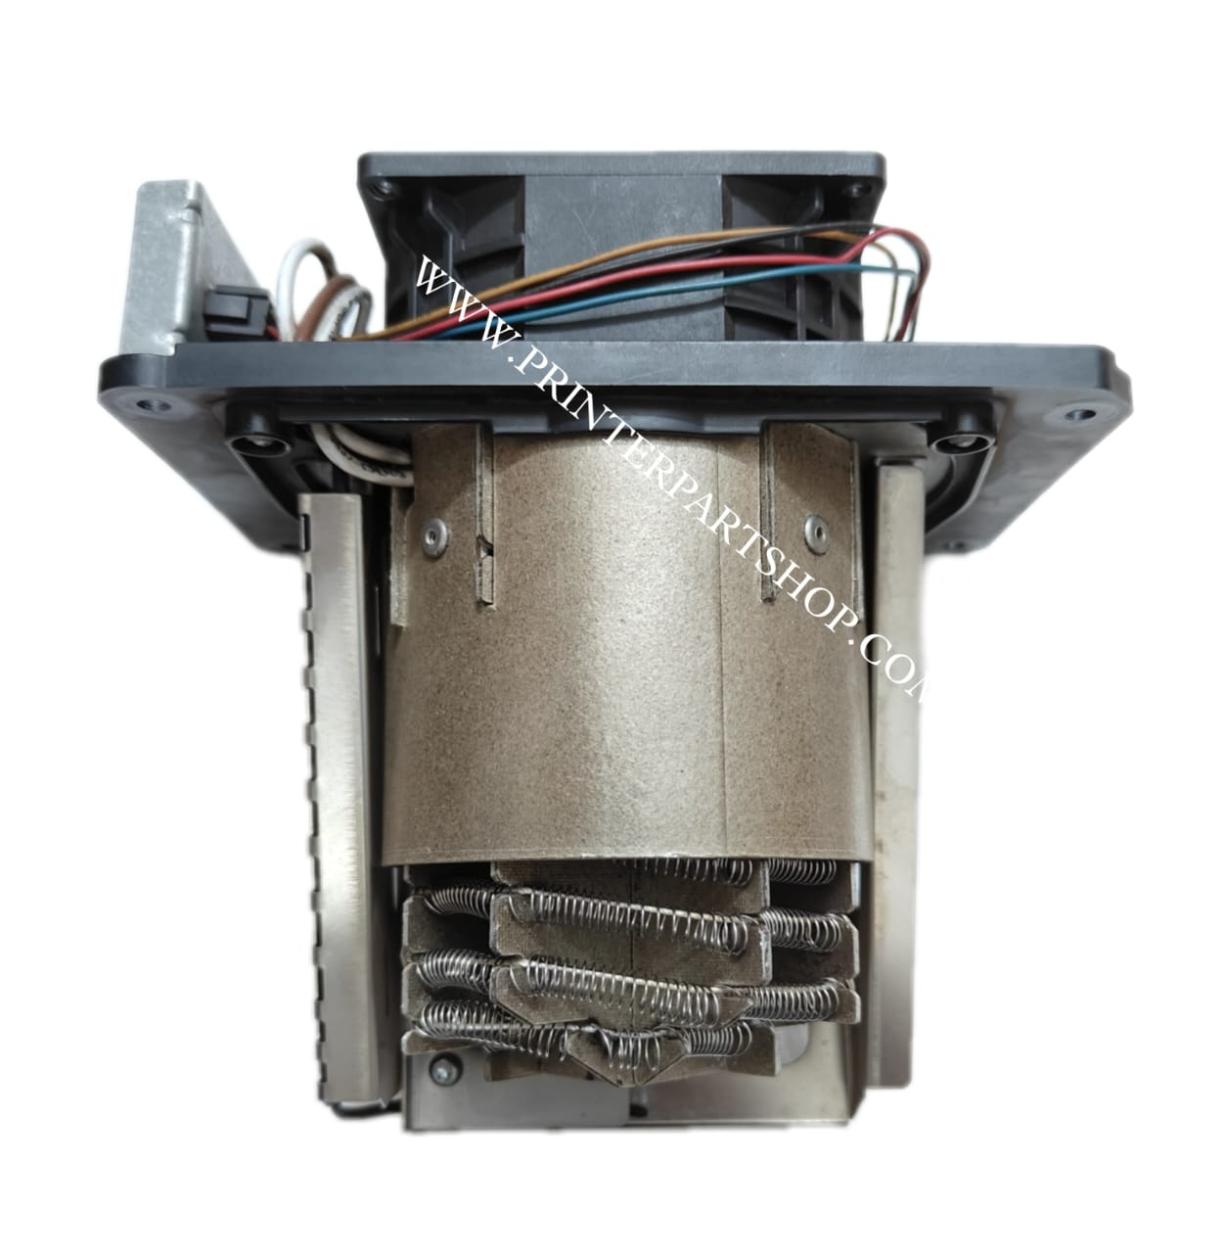 Fan Heater Assembly For HP Latex 560 570 M0E29-67047